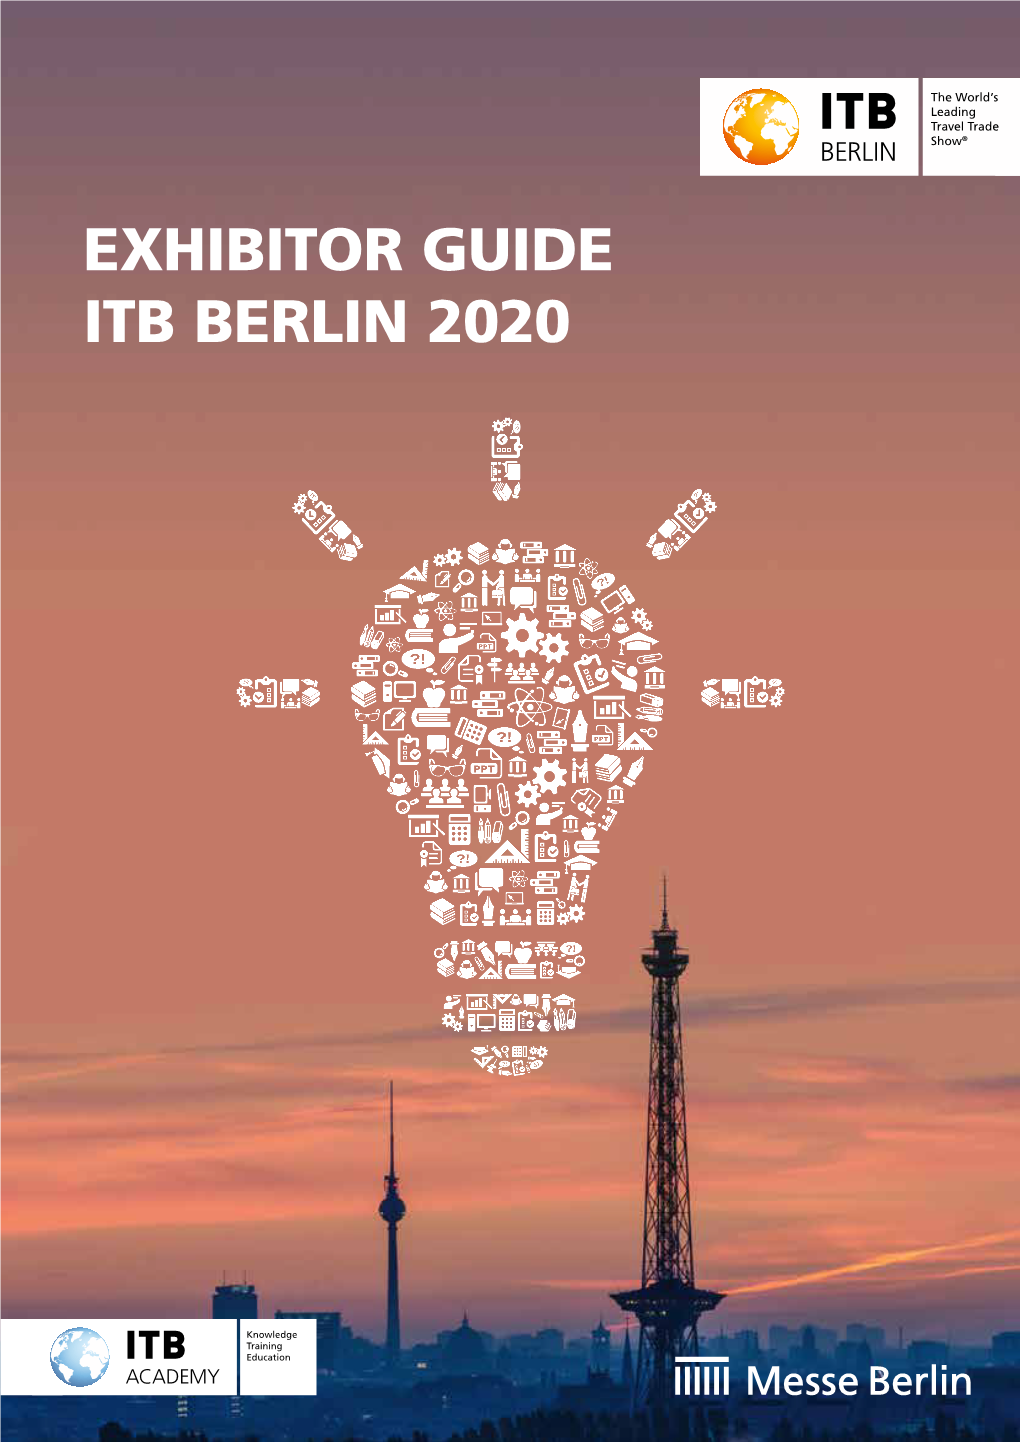 Exhibitor Guide Itb Berlin 2020 Editorial Table of Contents